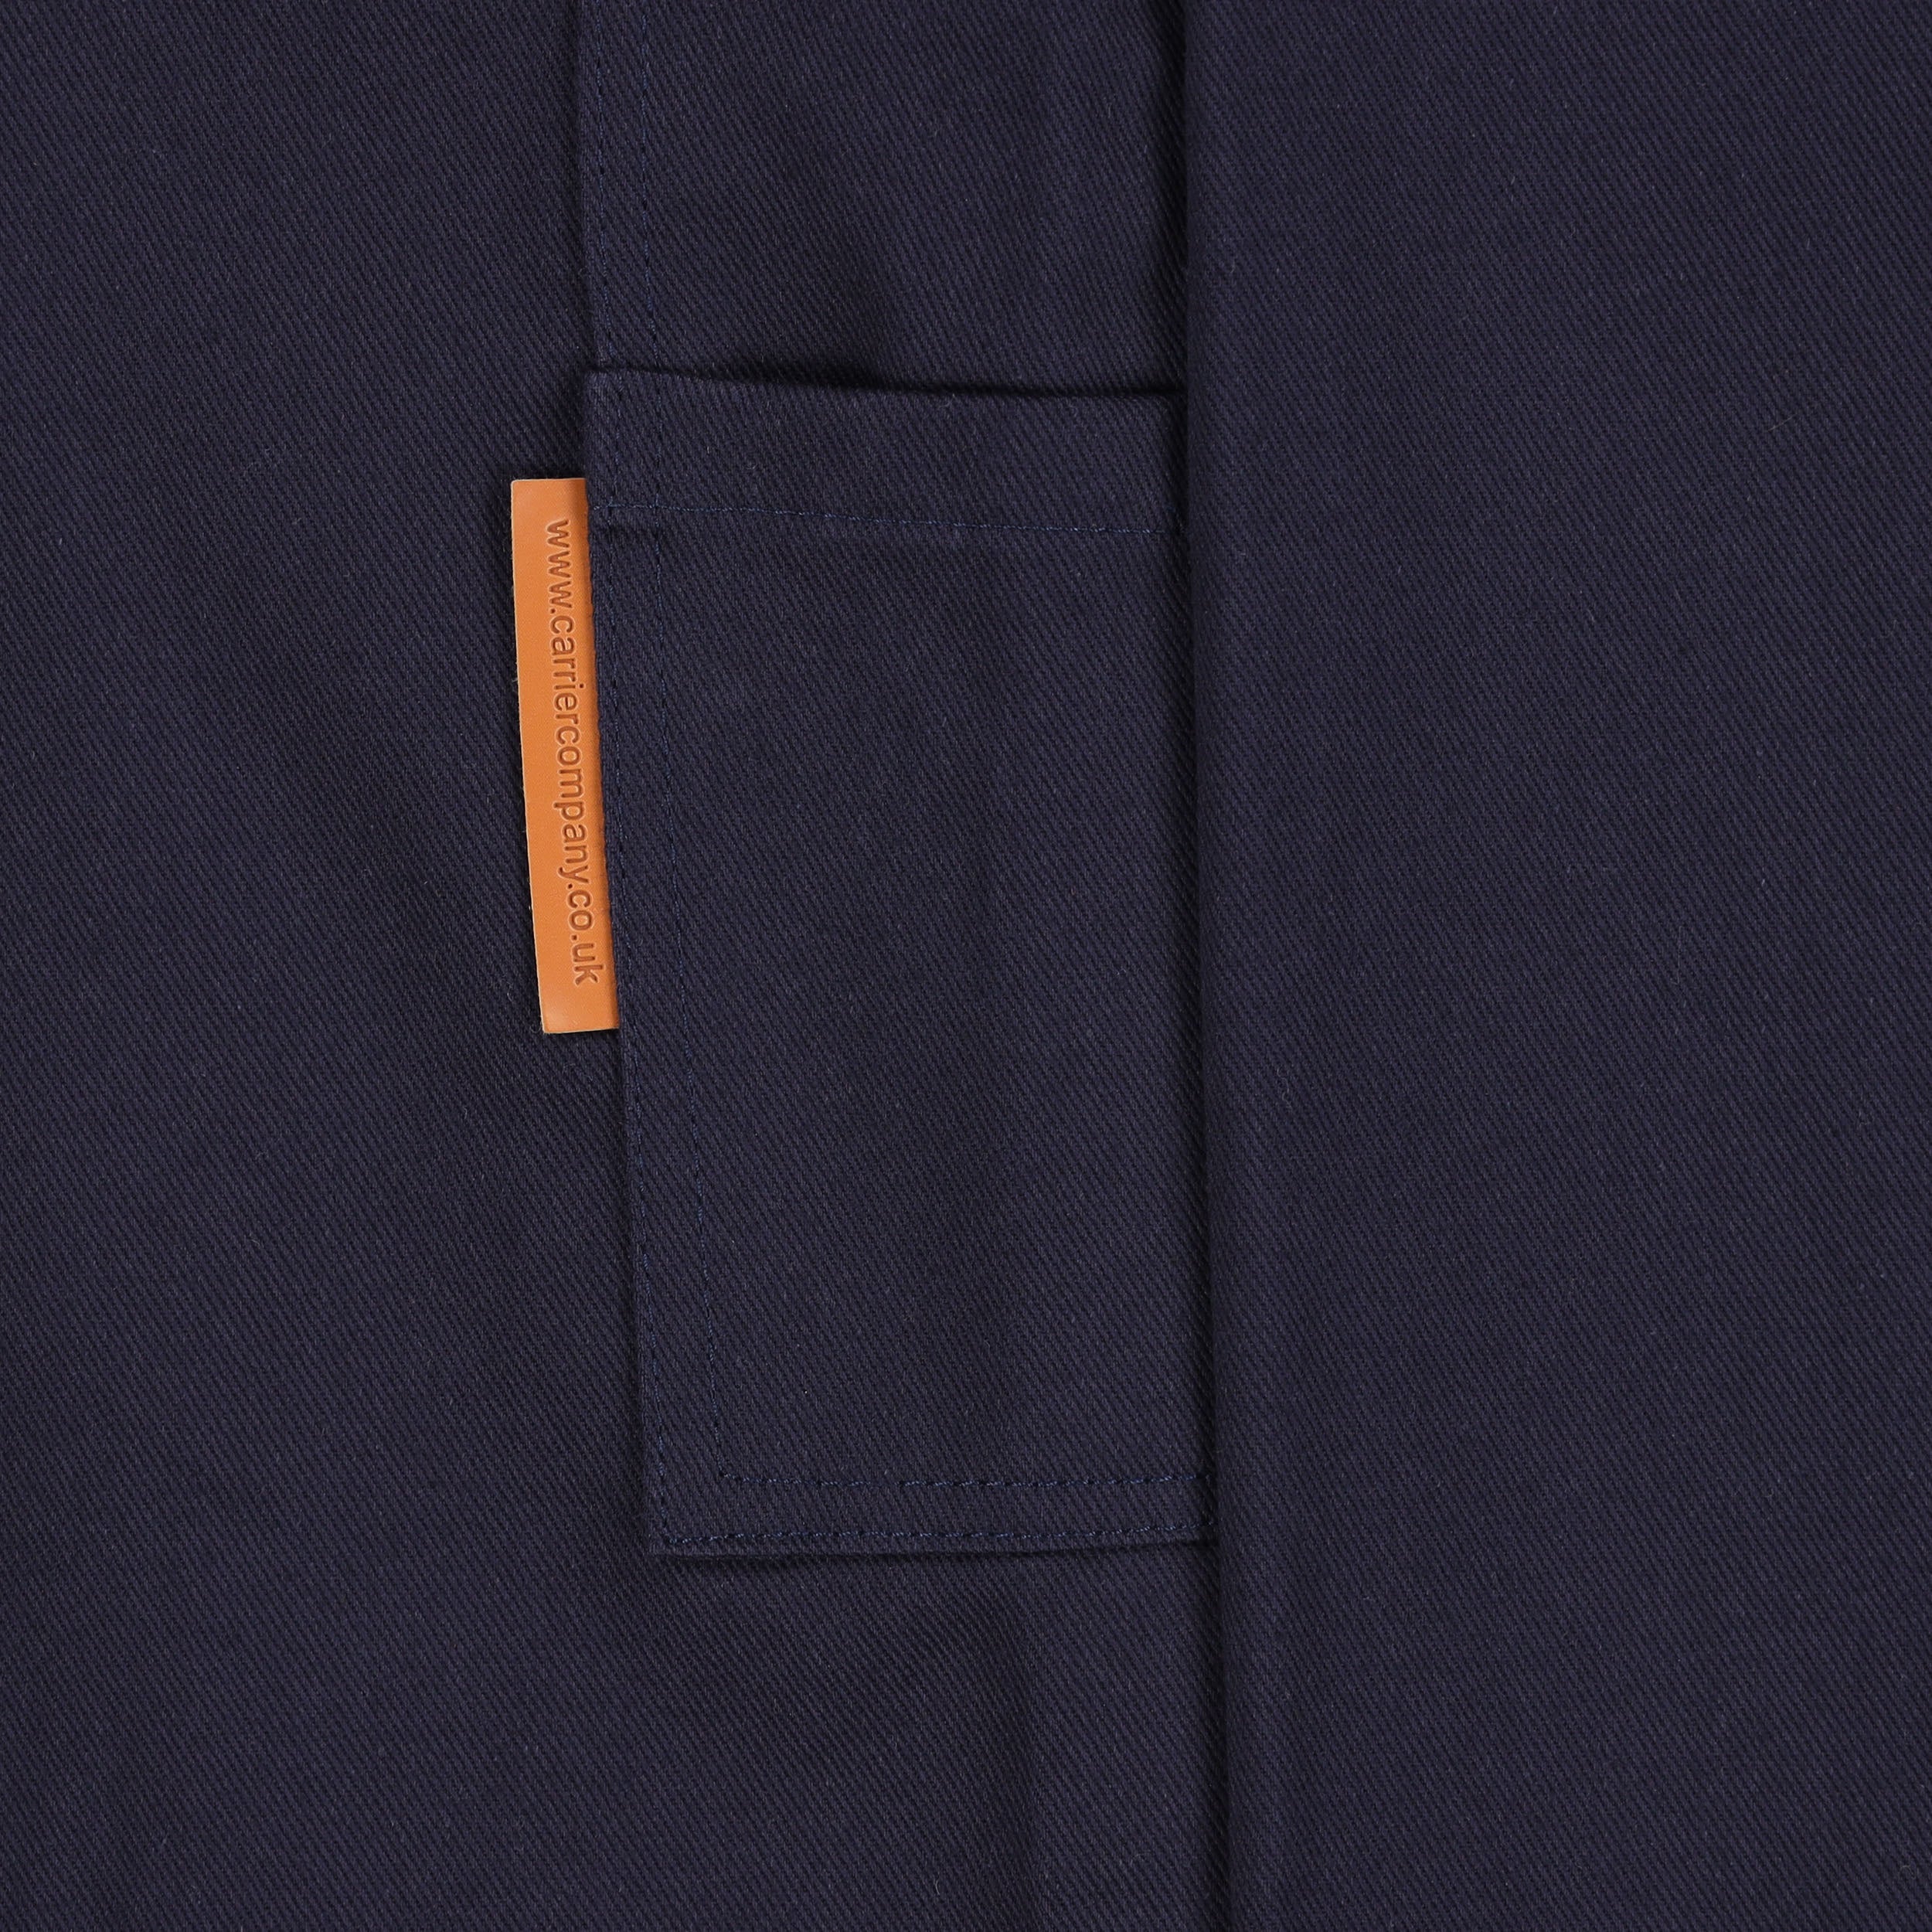 Close up of the pocket detail of the navy Carrier Company Men's Dungarees